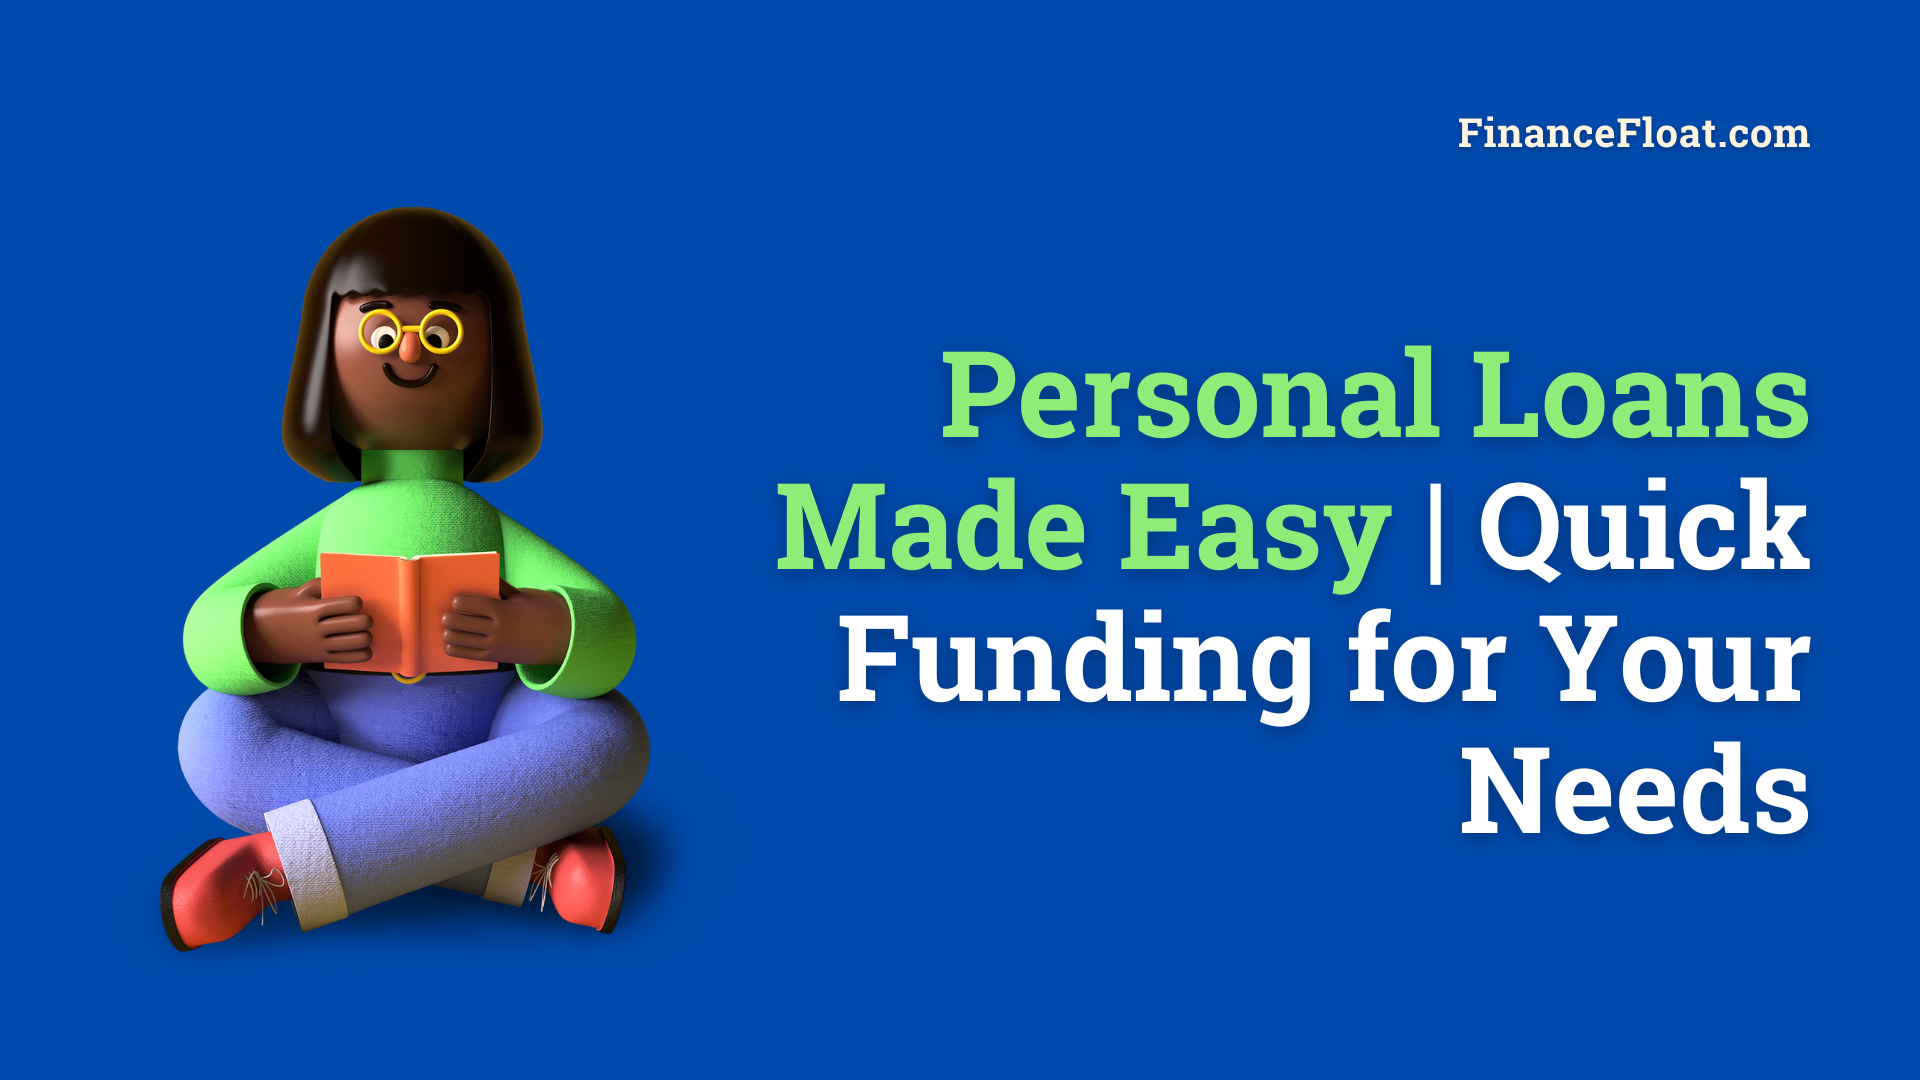 Personal Loans Made Easy Quick Funding for Your Needs